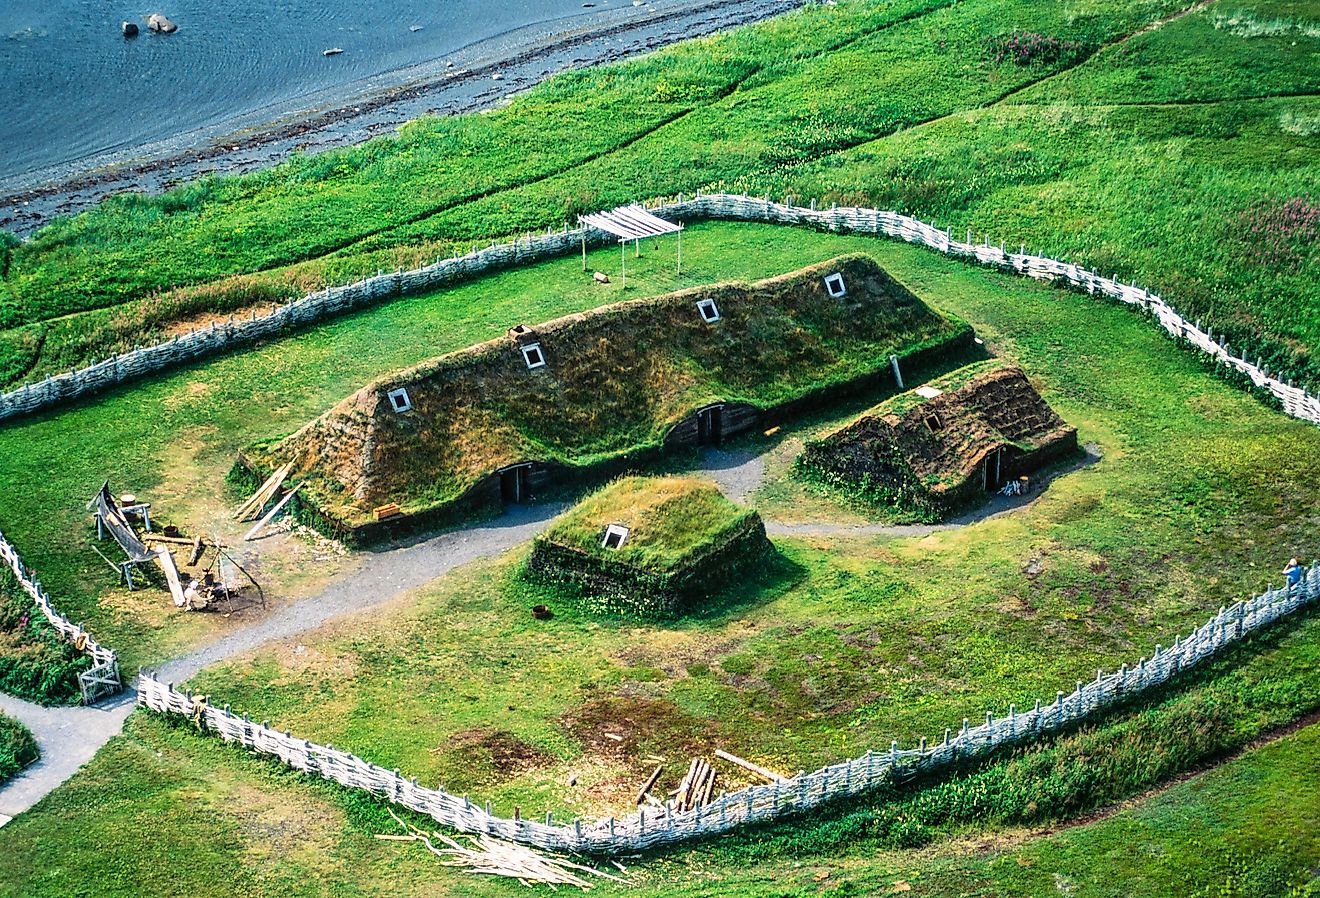  An aerial view of a reconstructed Norse settlement in Greenland, showing the impact of climate change on the landscape.